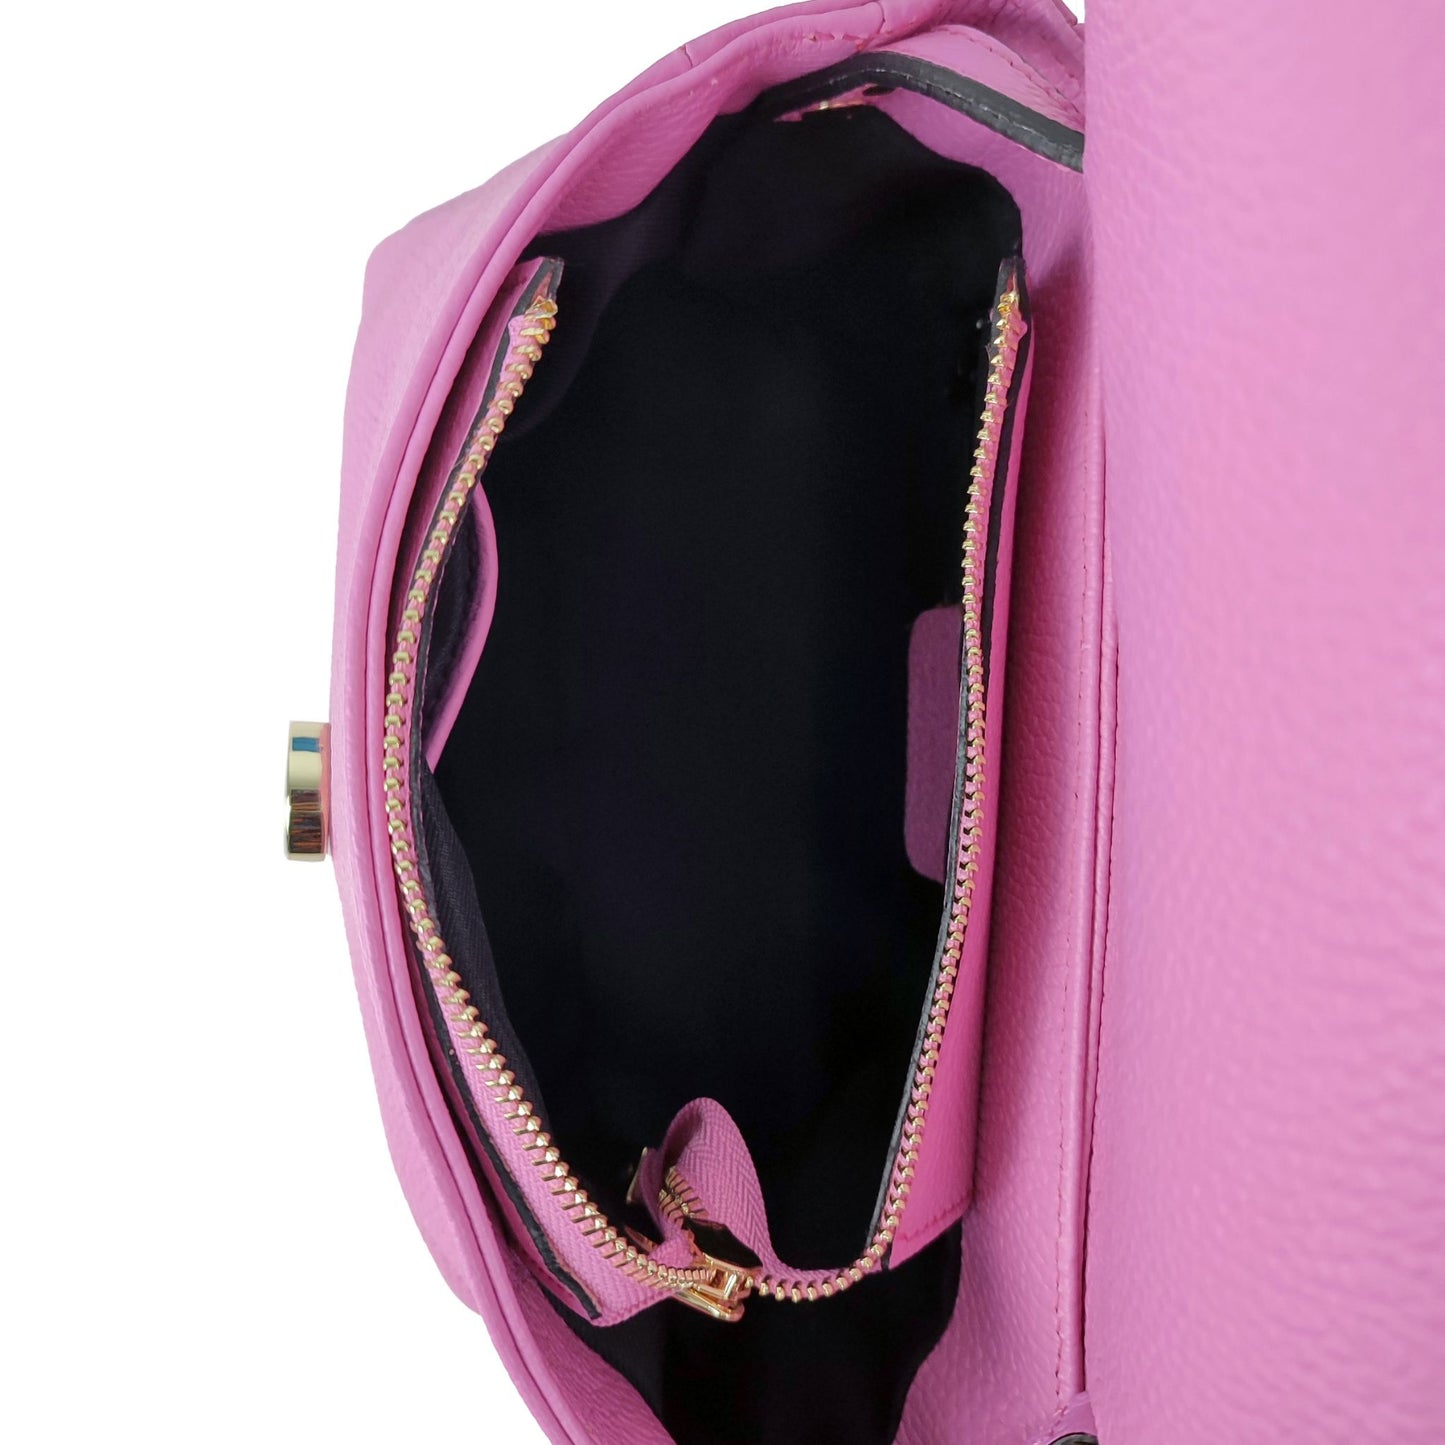 The Pink Leather handheld bag